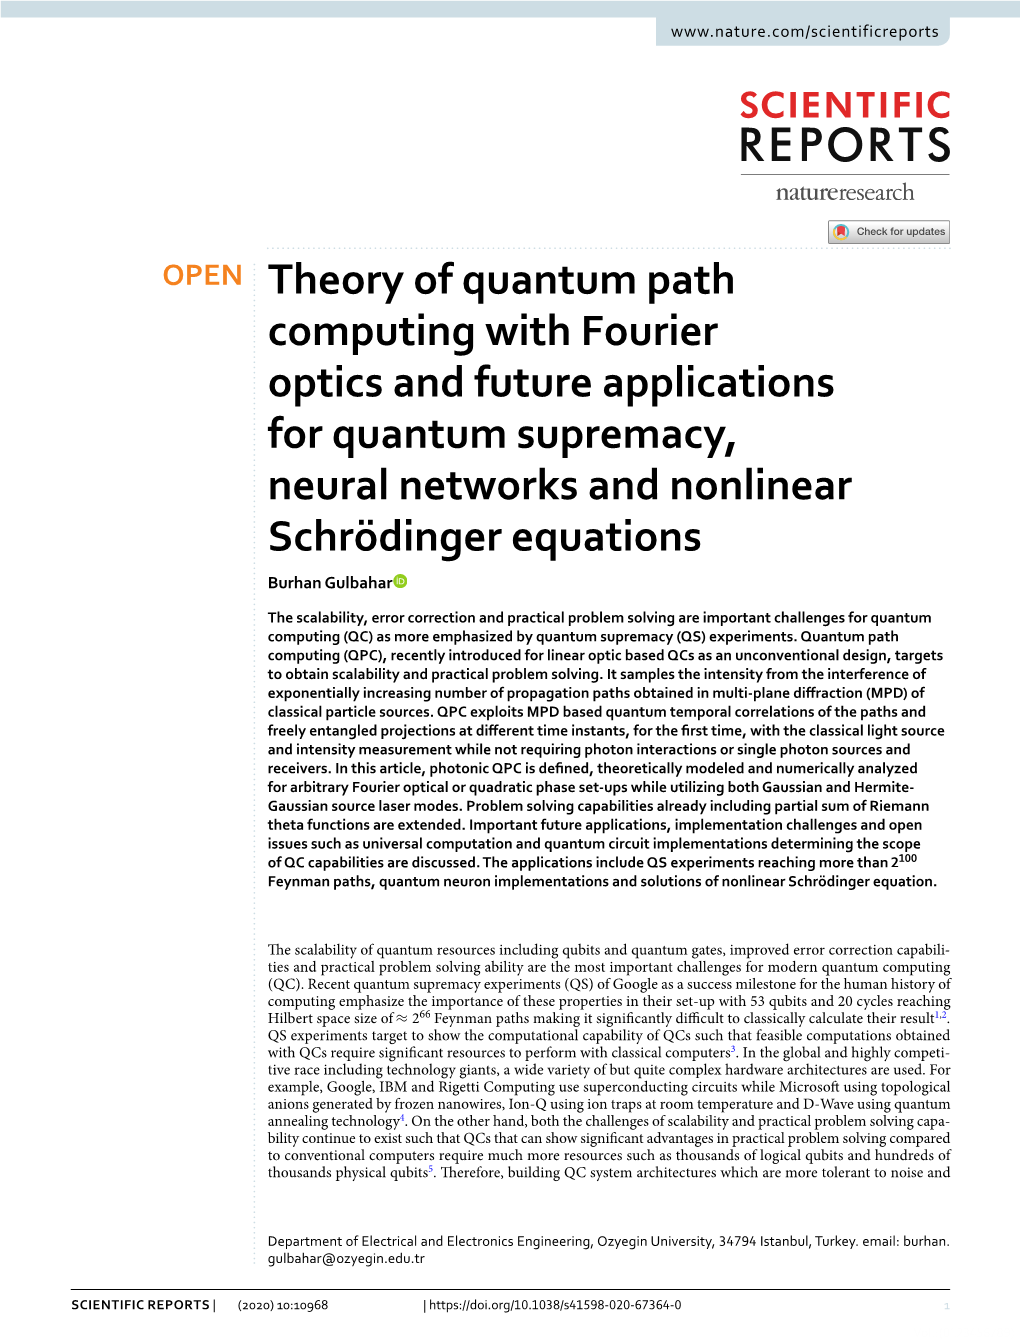 Theory of Quantum Path Computing with Fourier Optics and Future